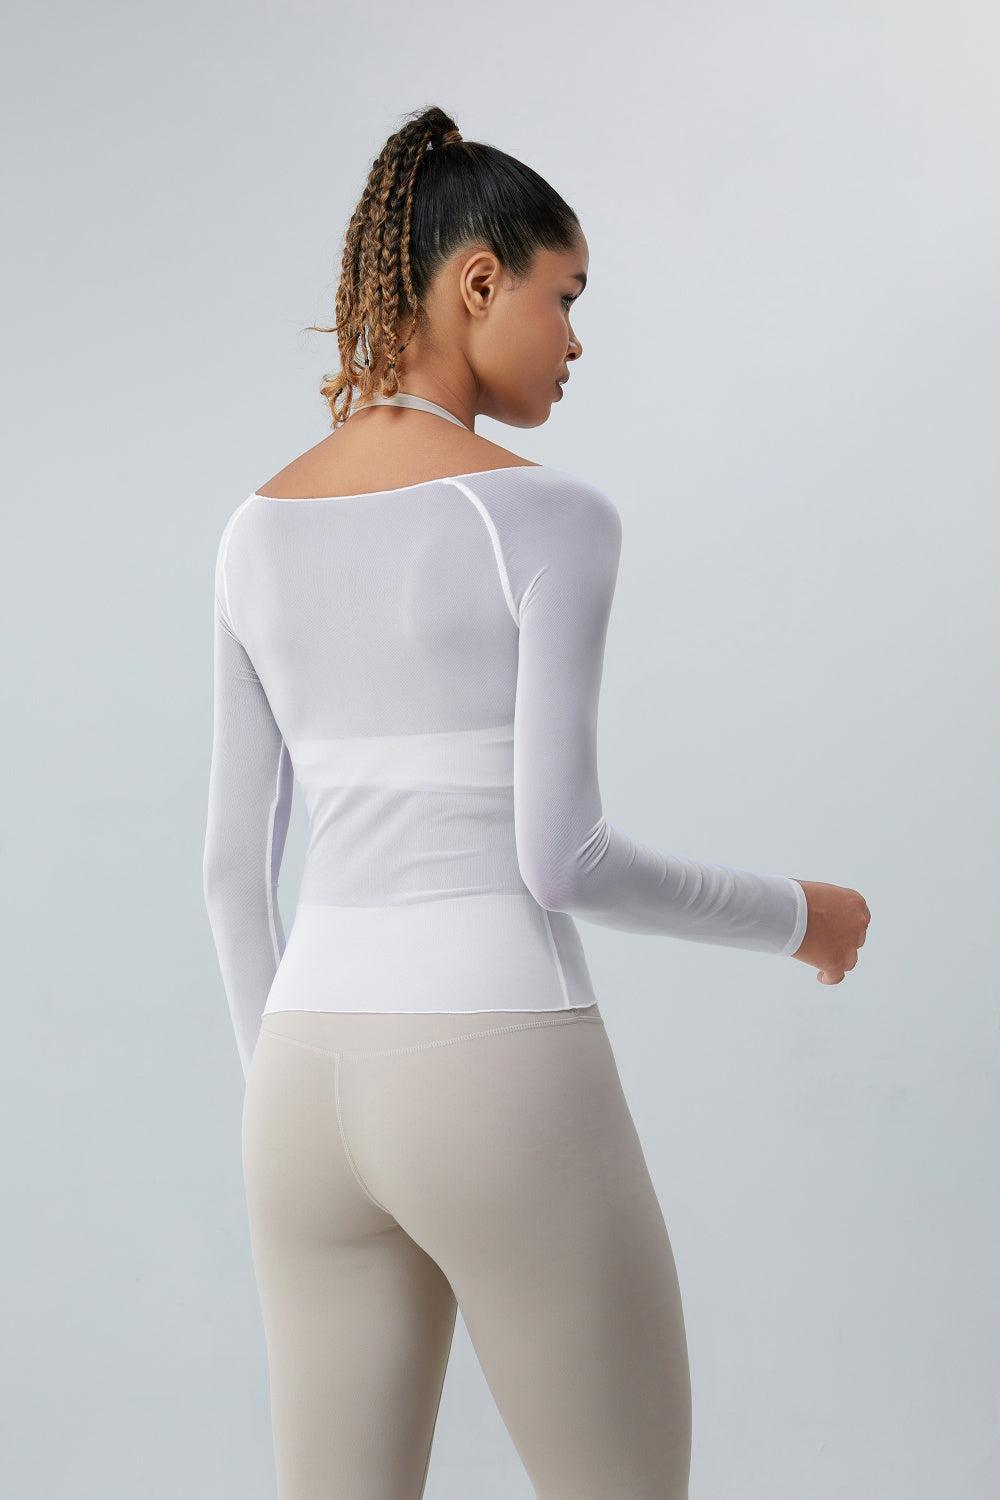 a woman in a white top and leggings